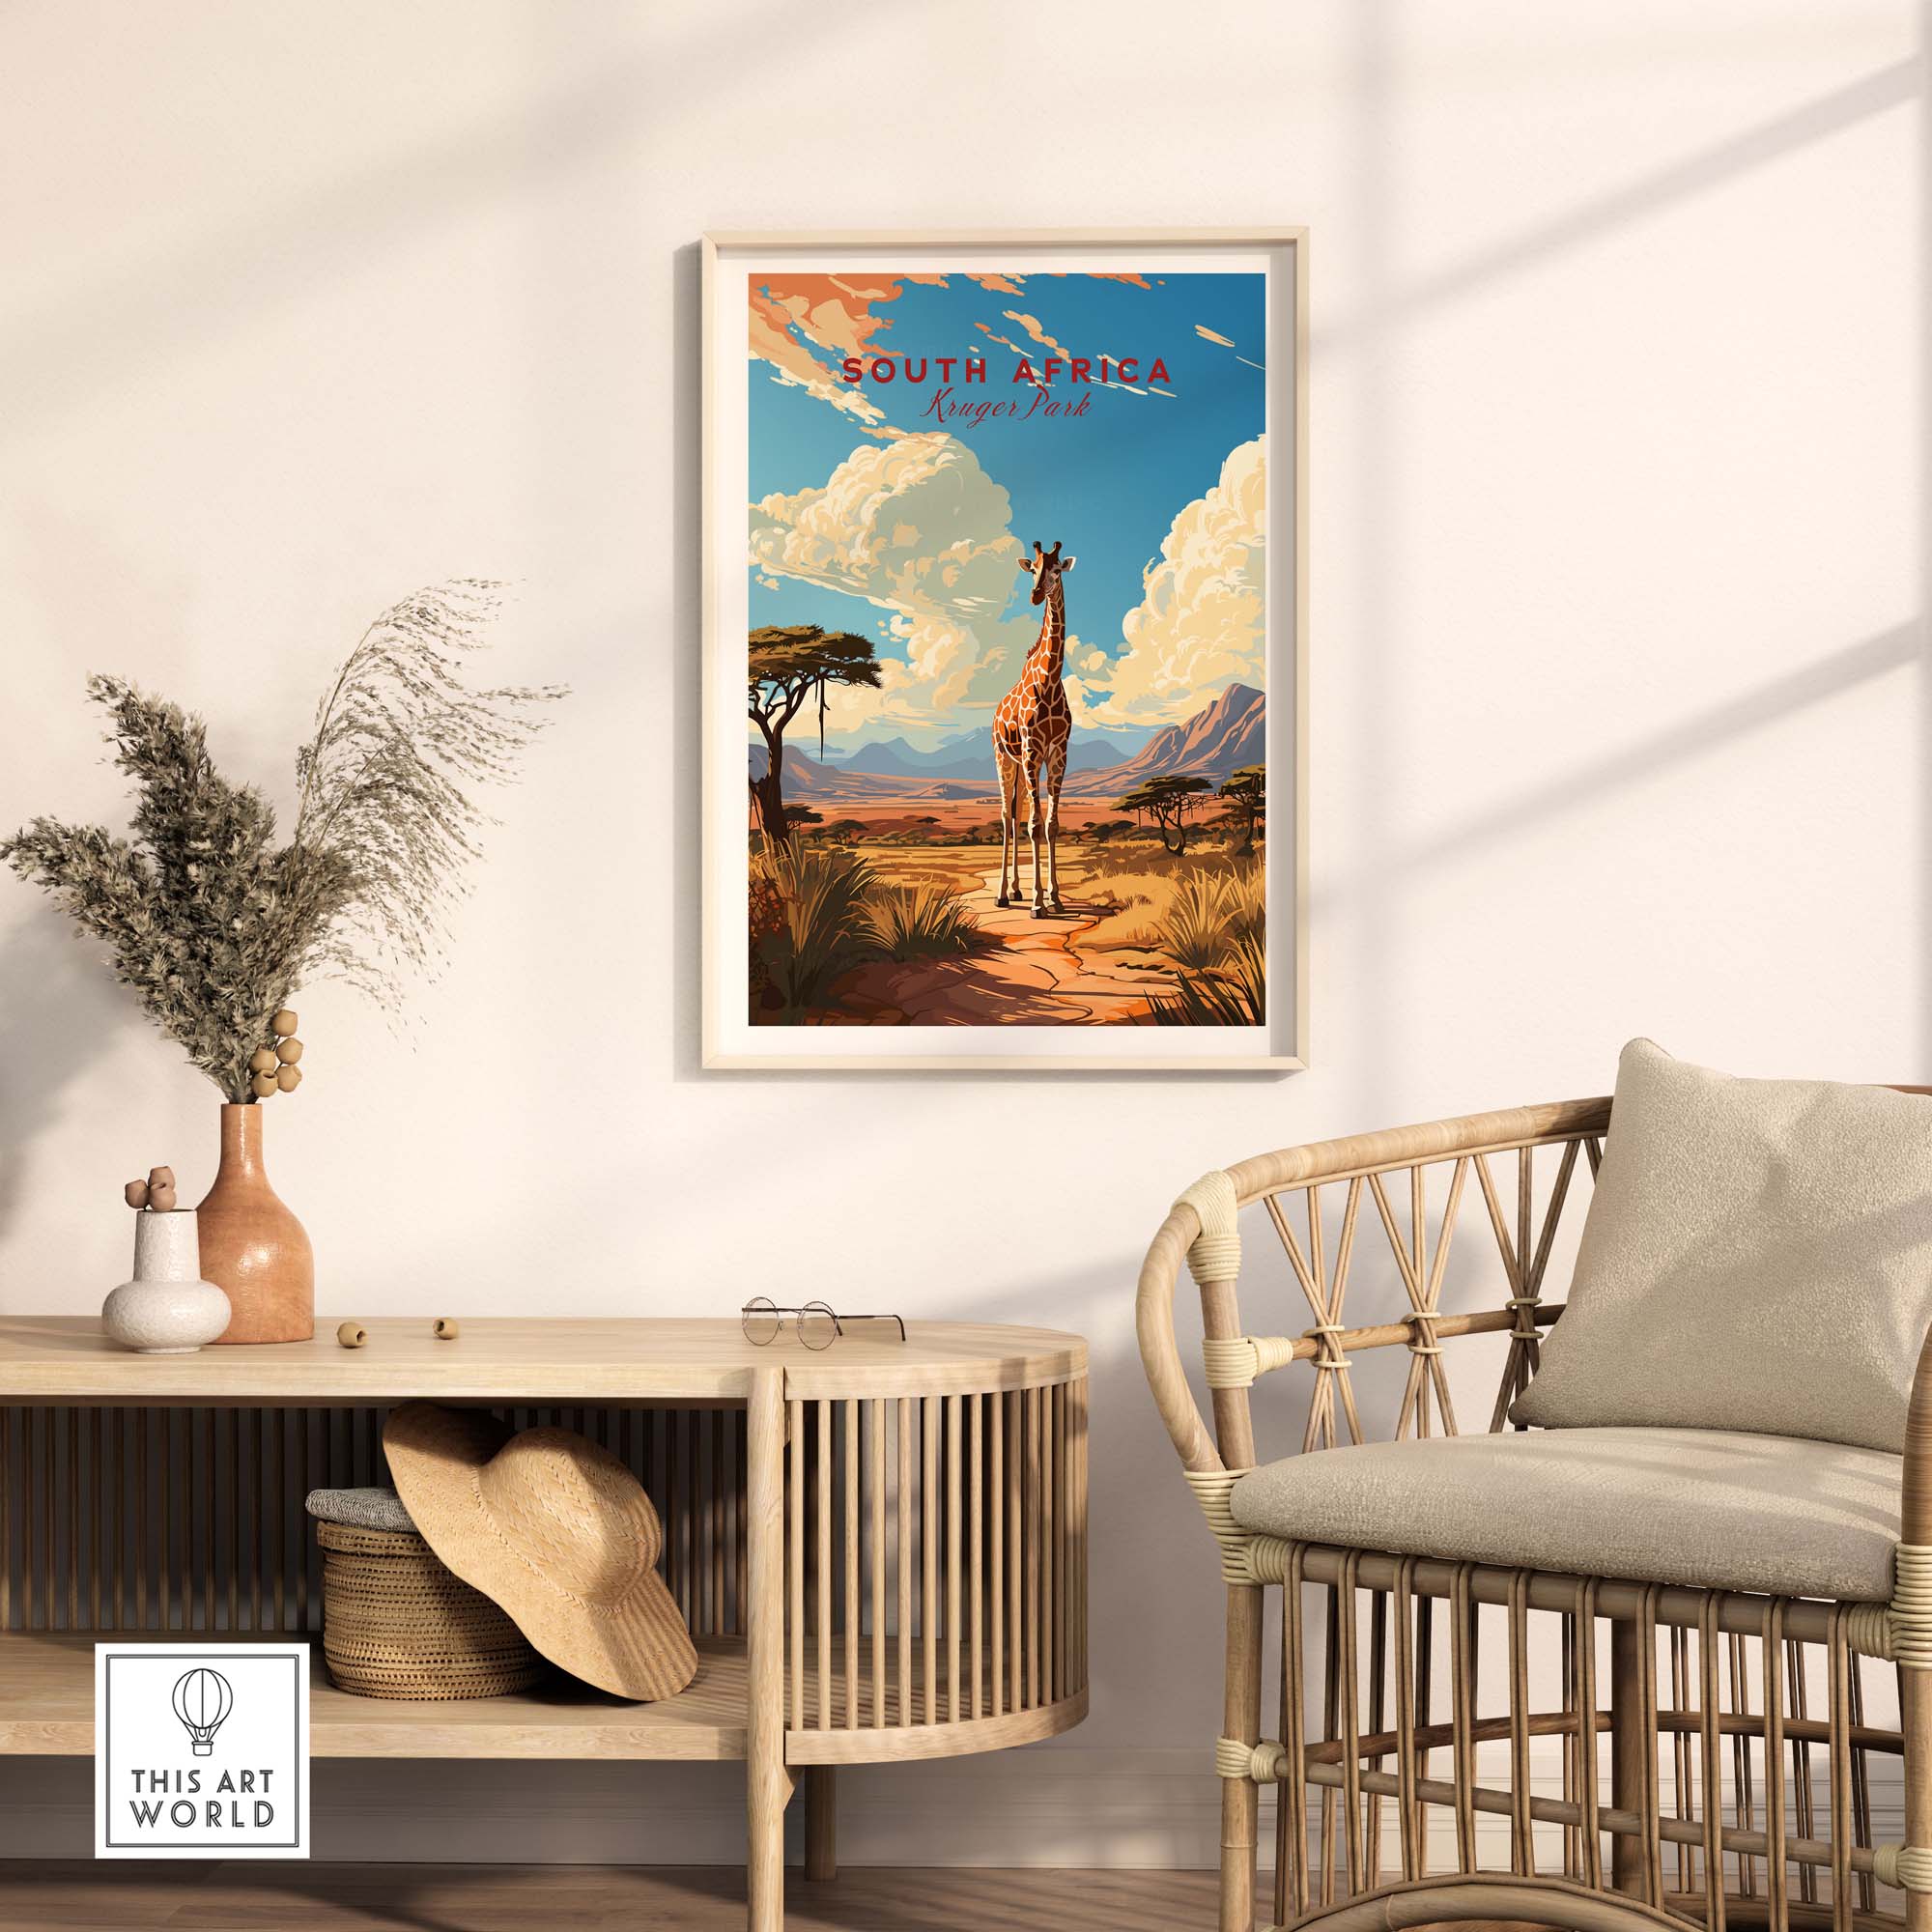 Travel Poster of Africa featuring a giraffe on safari